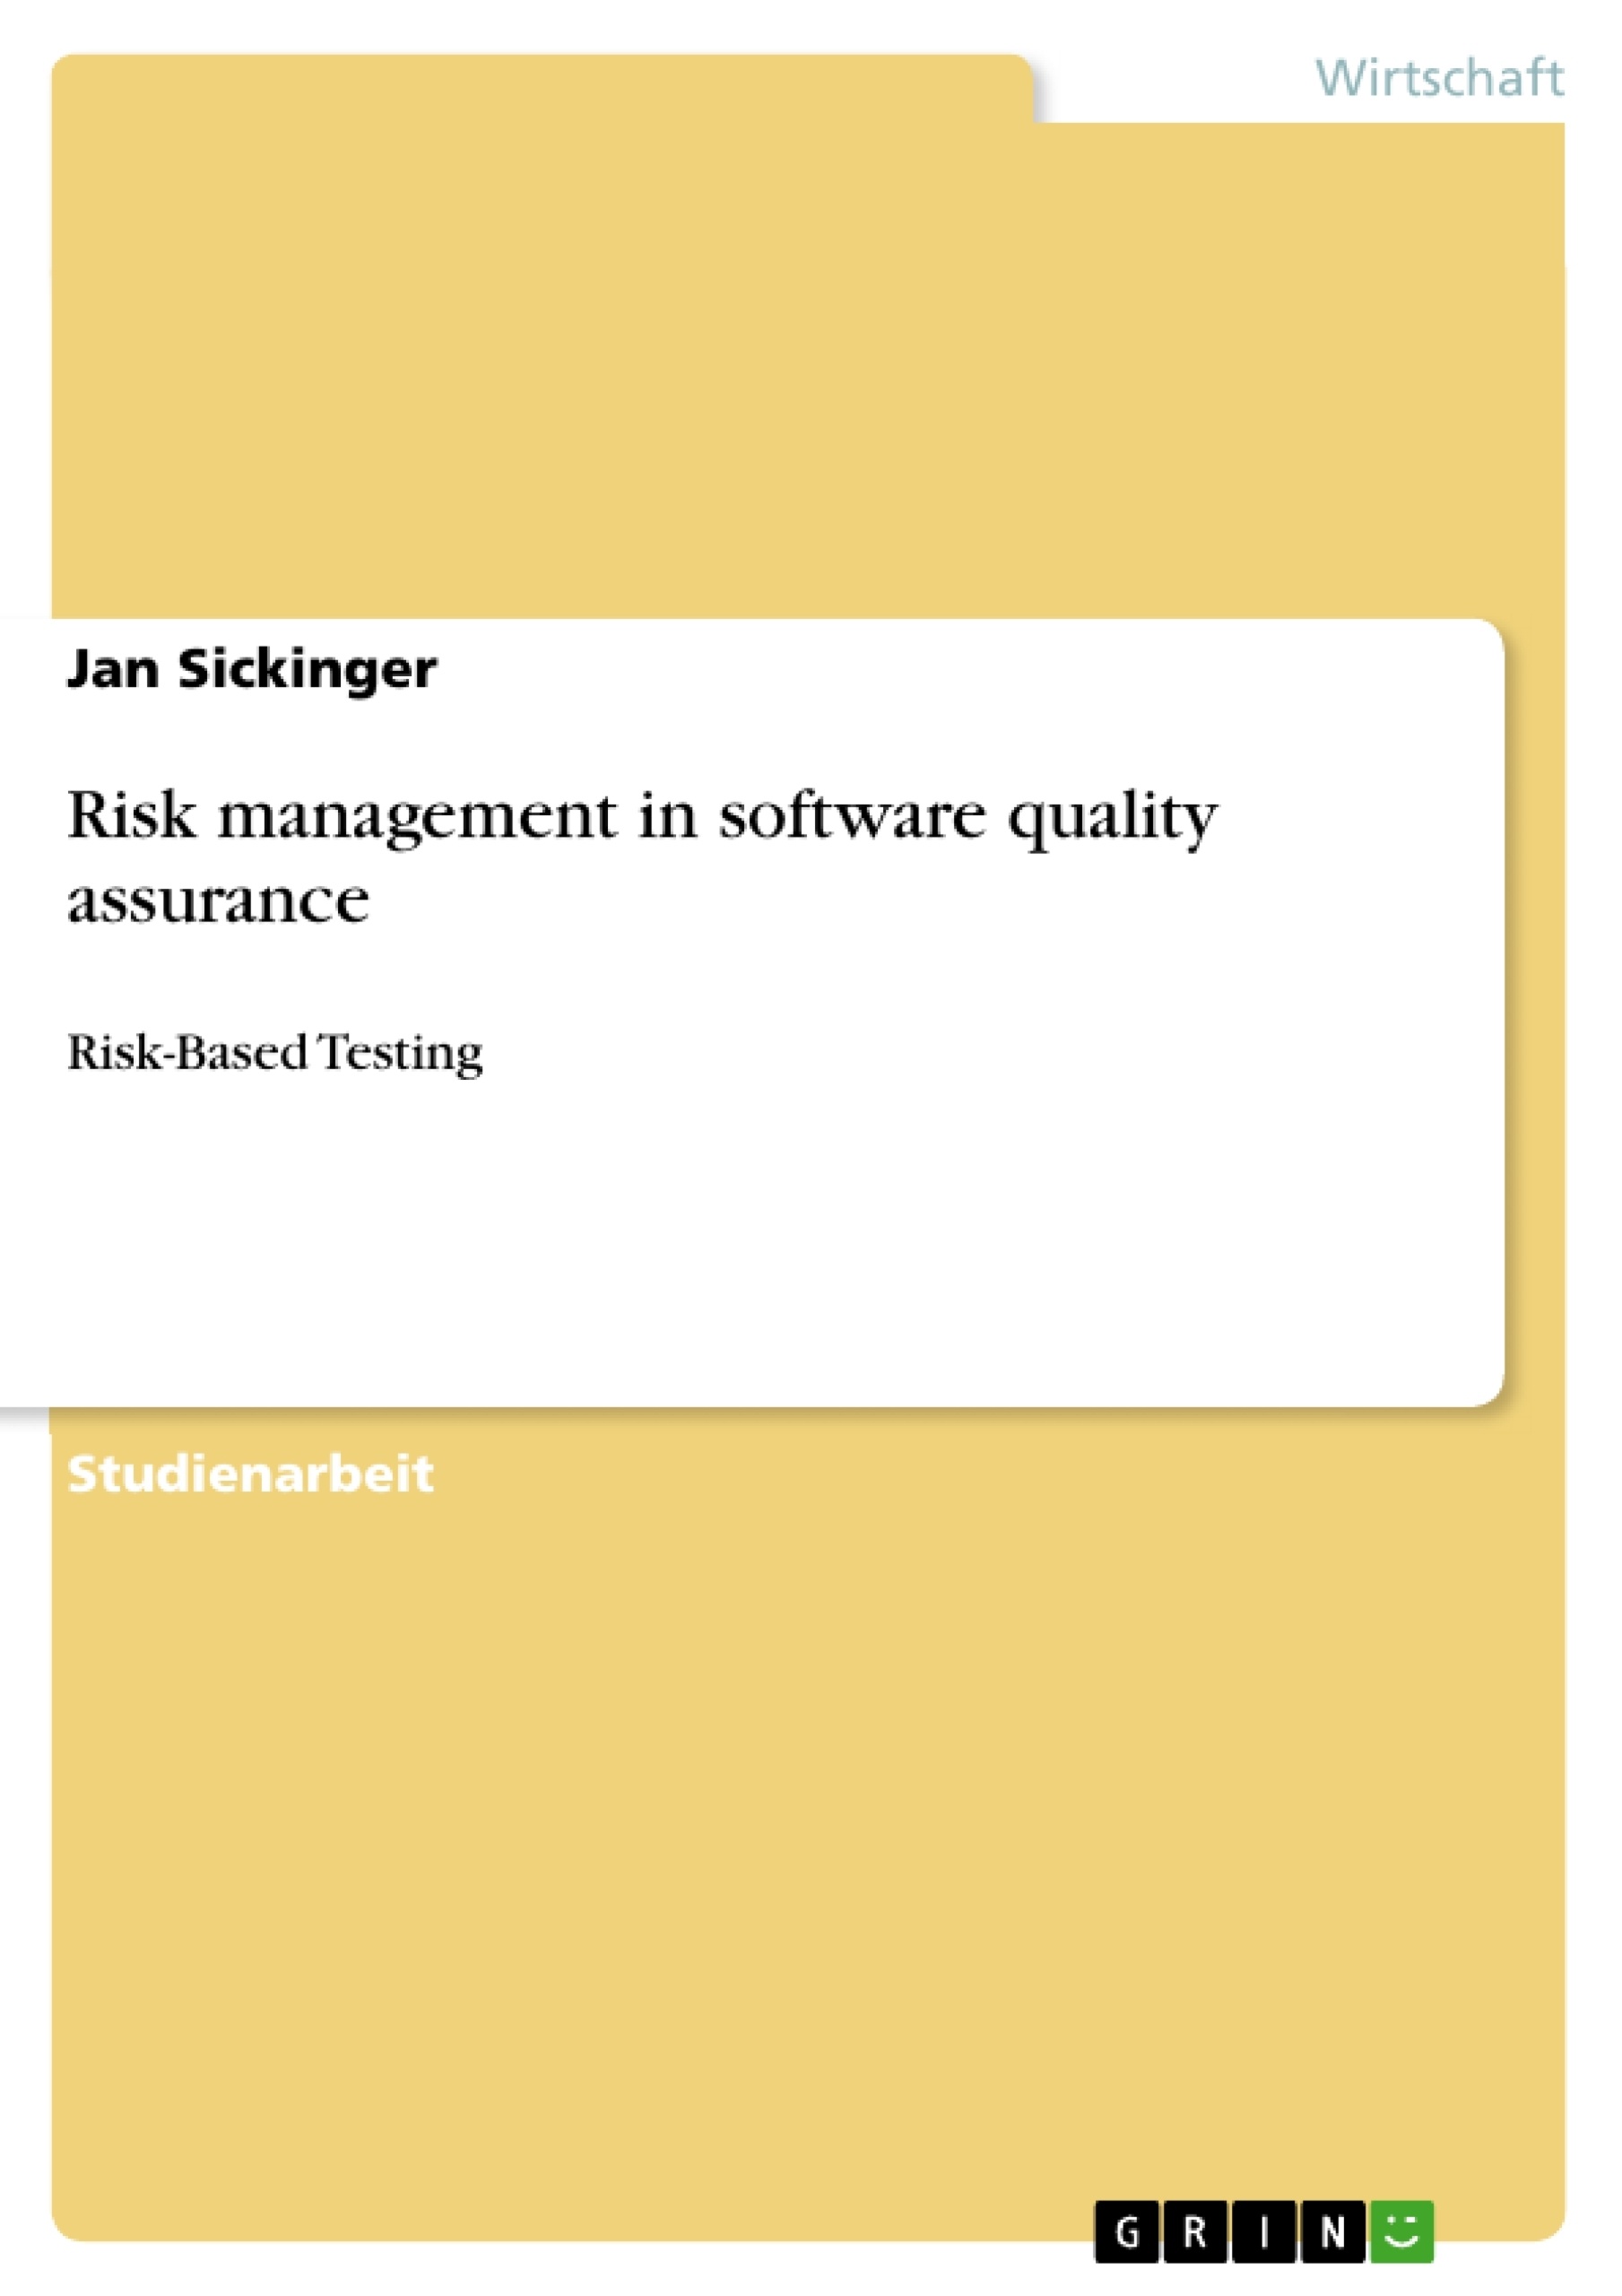 Título: Risk management in software quality assurance